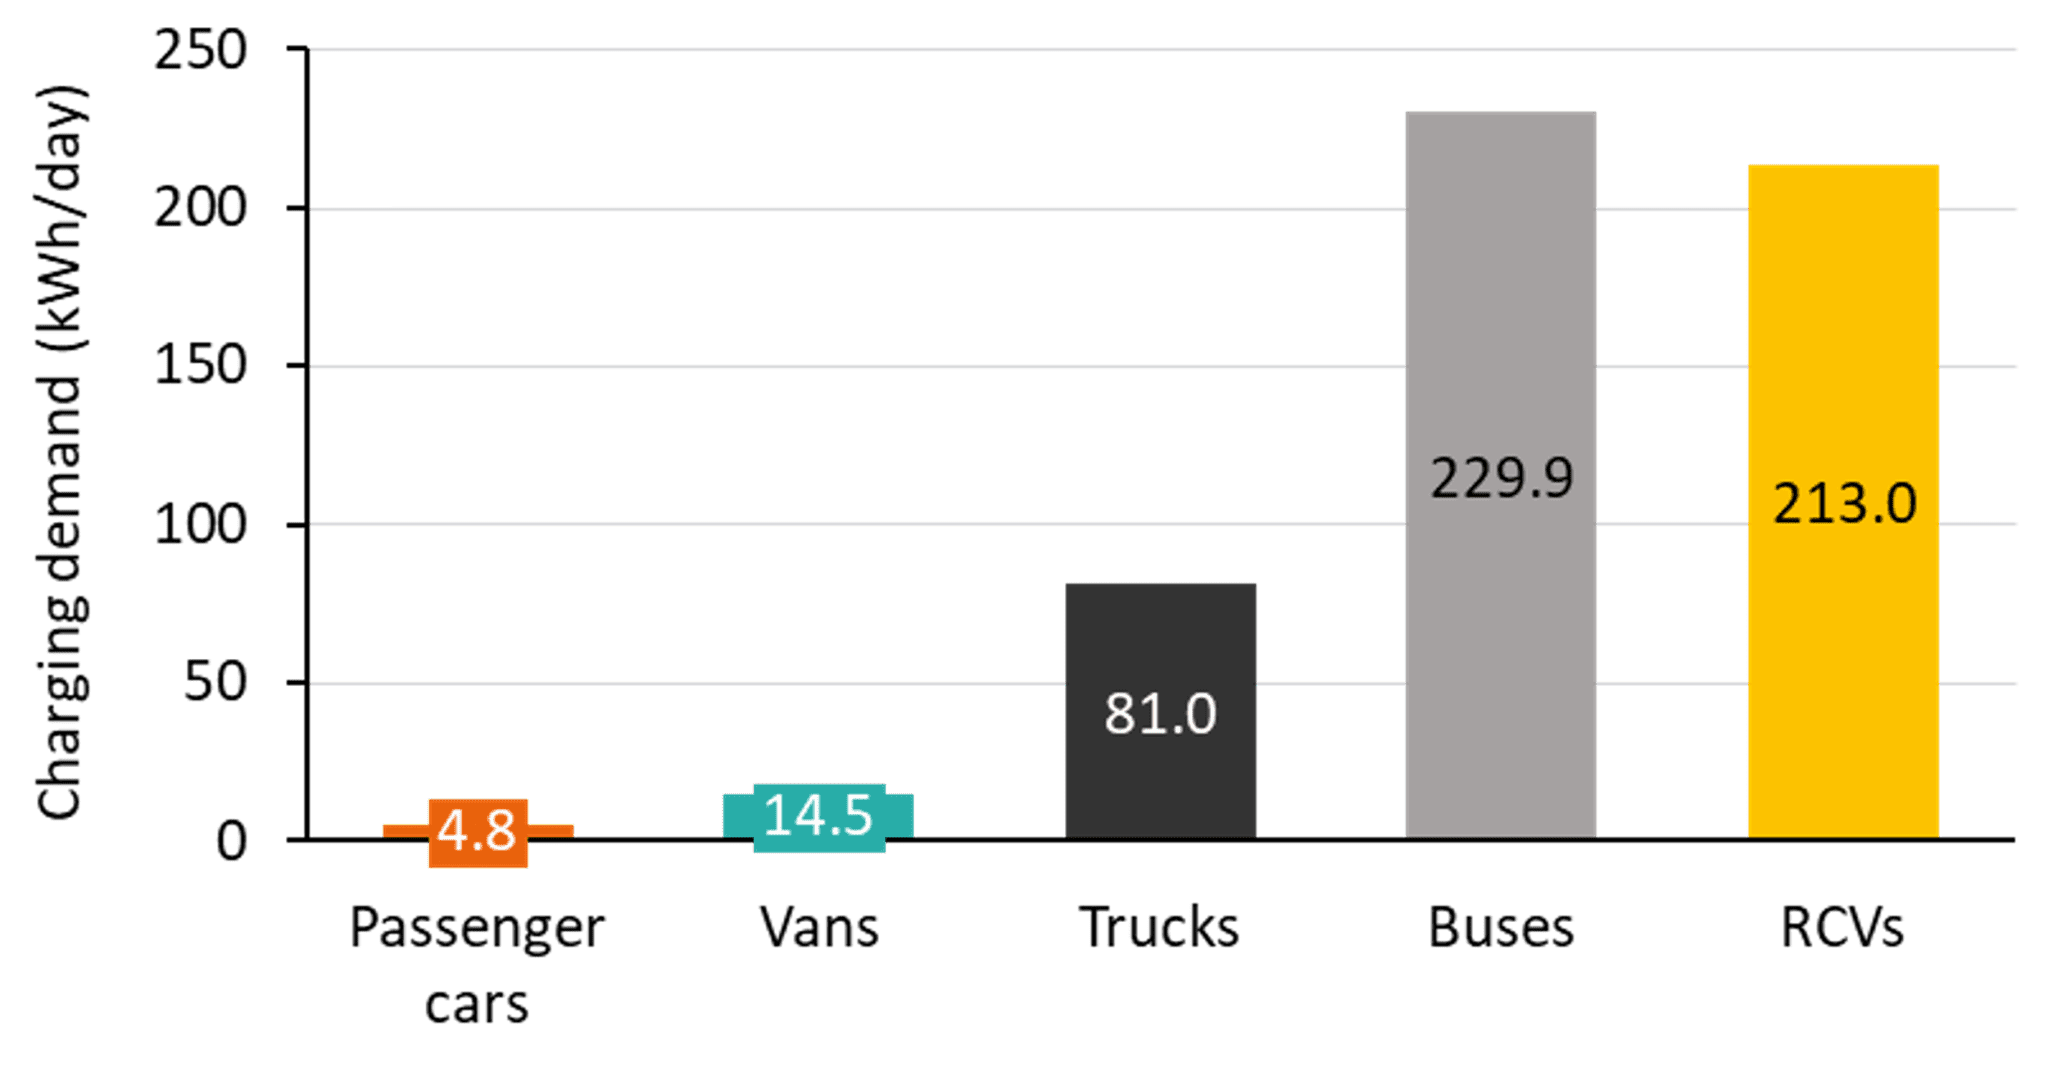 A bar chart containing to charging demand for passenger cars, vans, trucks, buses and refuse collection vehicles. The charging demand is given in kilowatt-hours per day. Passenger cars have a charging demand of 4.8 kilowatt-hours. Vans have a charging demand of 15.5 kilowatt-hours. Trucks have a charging demand of 81 kilowatt-hours. Buses have a charging demand of 229.9 kilowatt-hours. Refuse collection vehicles have a charging demand of 213 kilowatt-hours.  